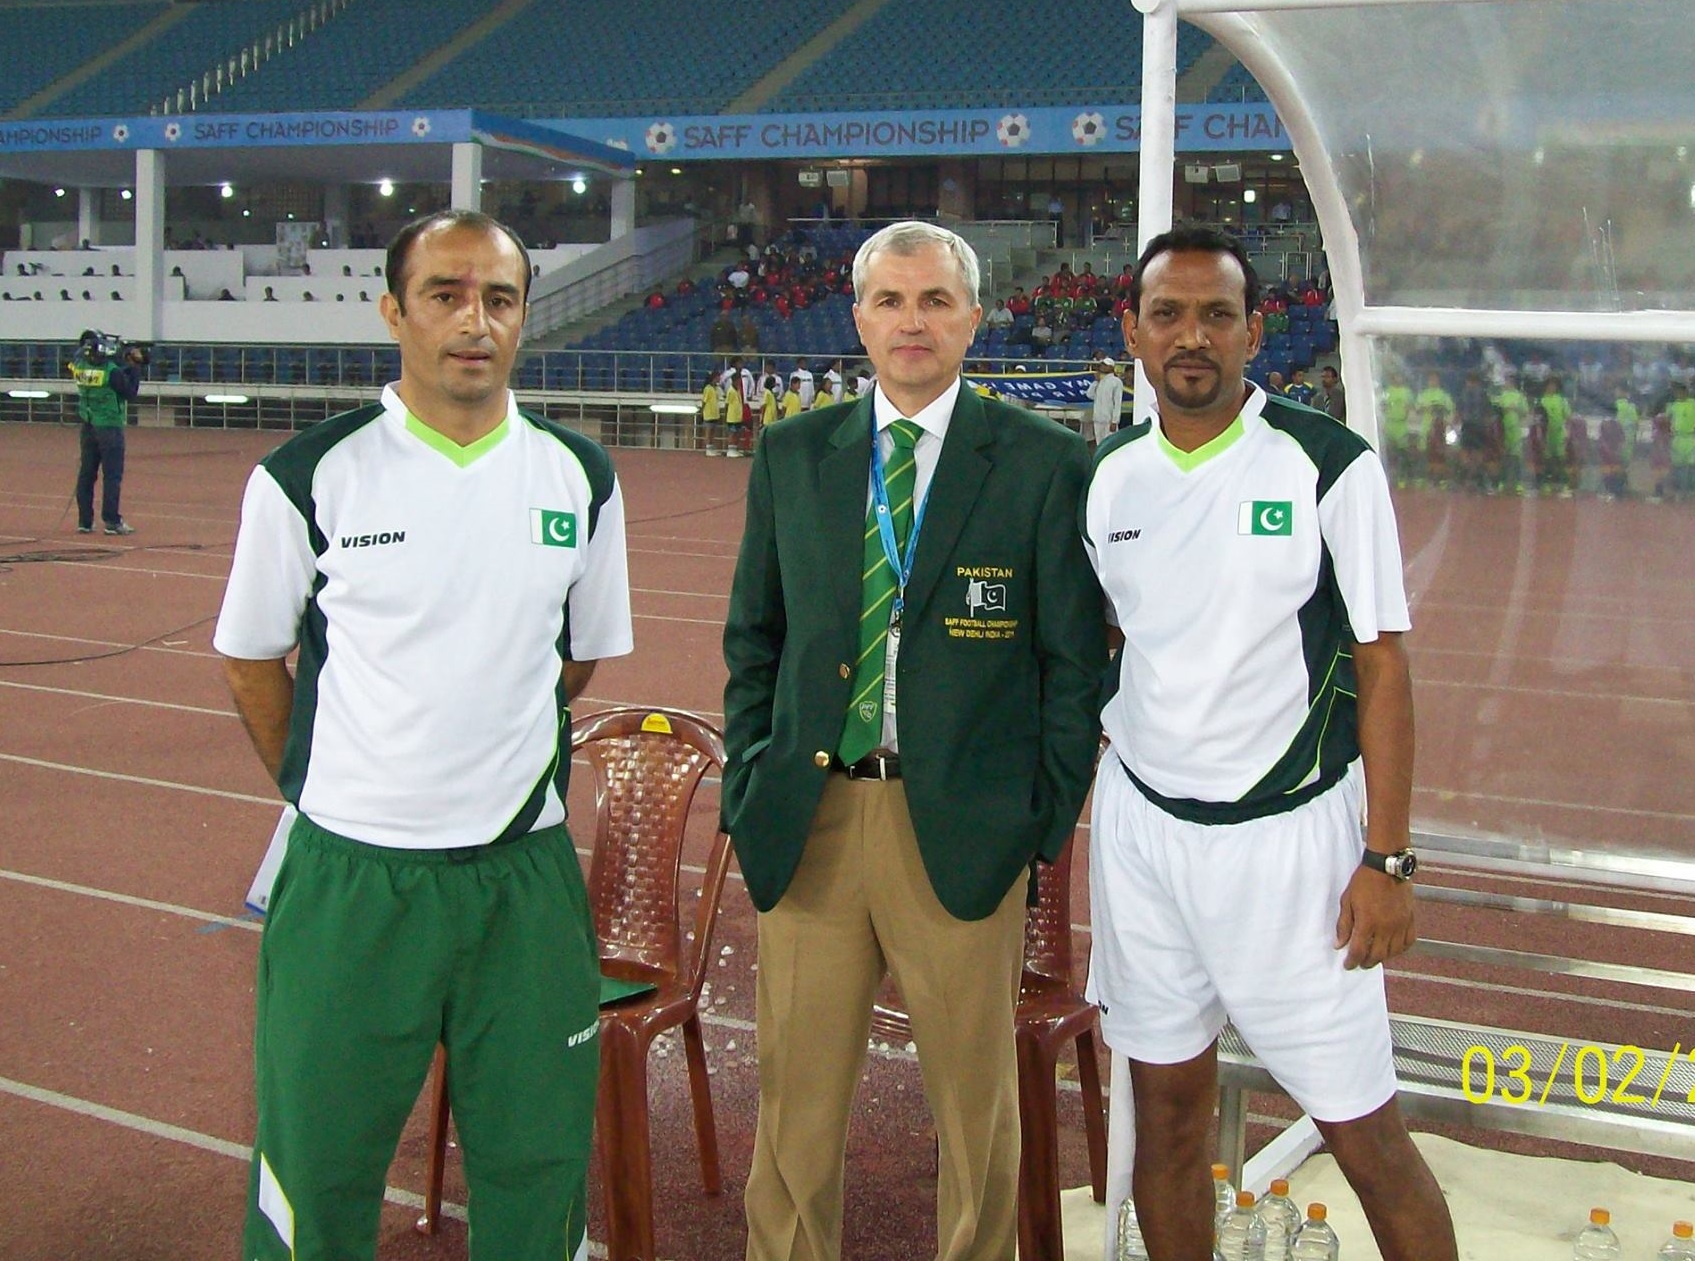 AFC’s stance to seek mandate extension for PFF irks Nasir [The News]